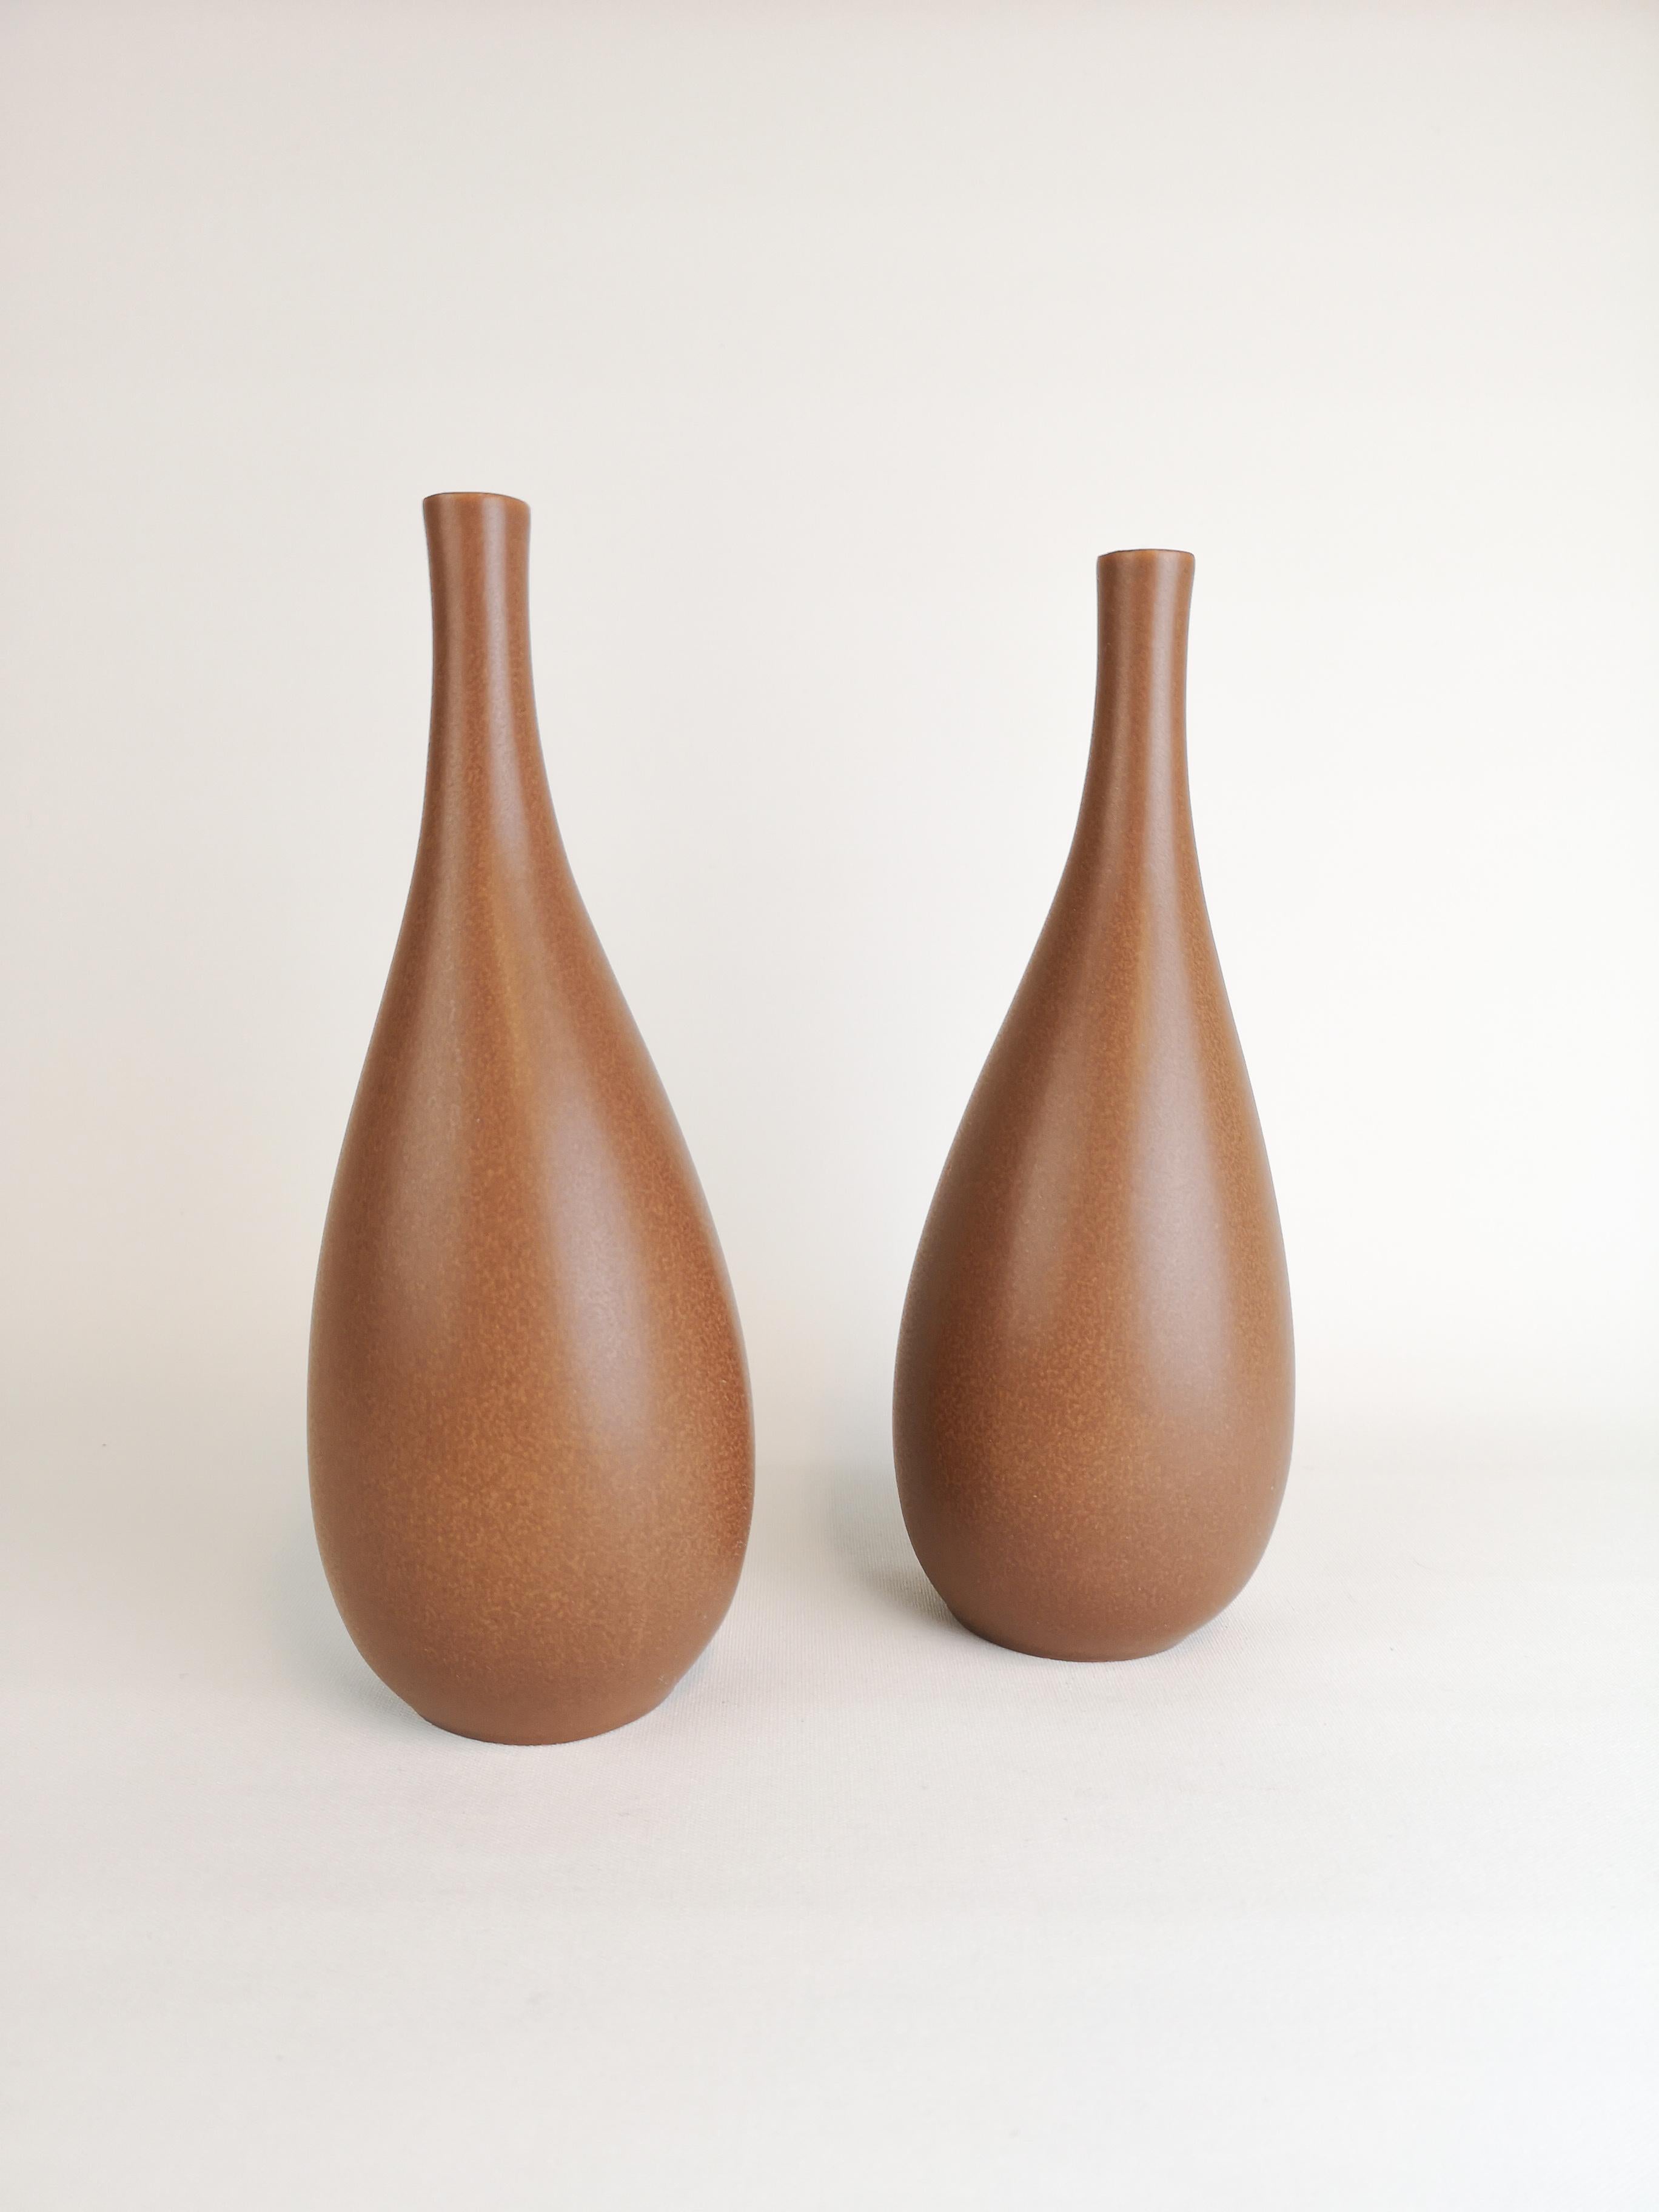 Two nicely shaped vases produced in Sweden and Gustavsberg. The designer Stig Lindberg is excellent in the way he has made the forms of the vases. Stig Lindberg's striking vase with swelling form and semi-matte brown glaze. Elegant midcentury